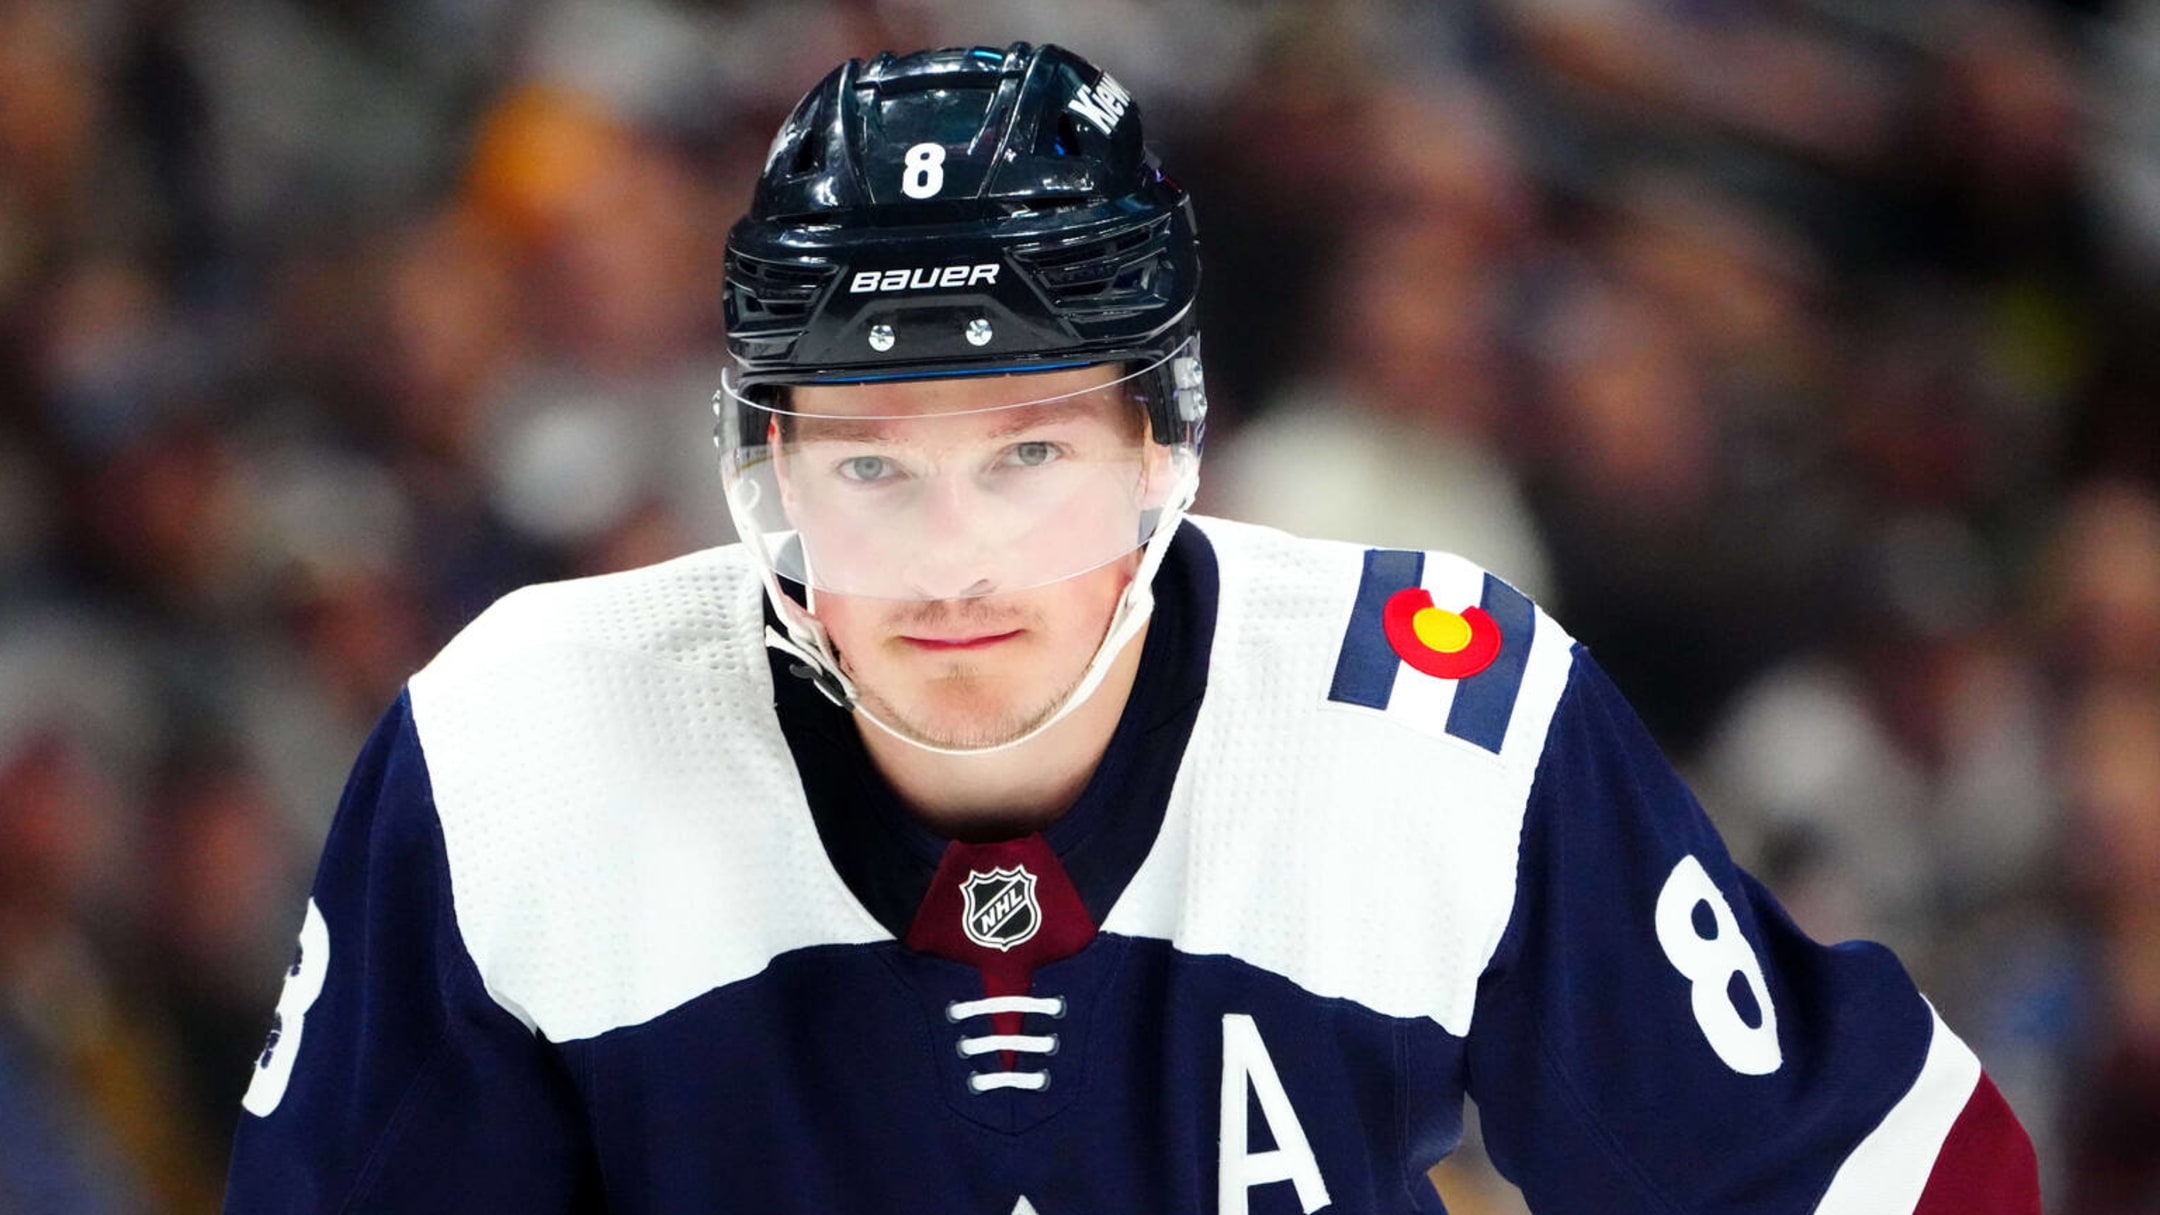 Colorado Avalanche: Gabriel Landeskog out indefinitely with lower